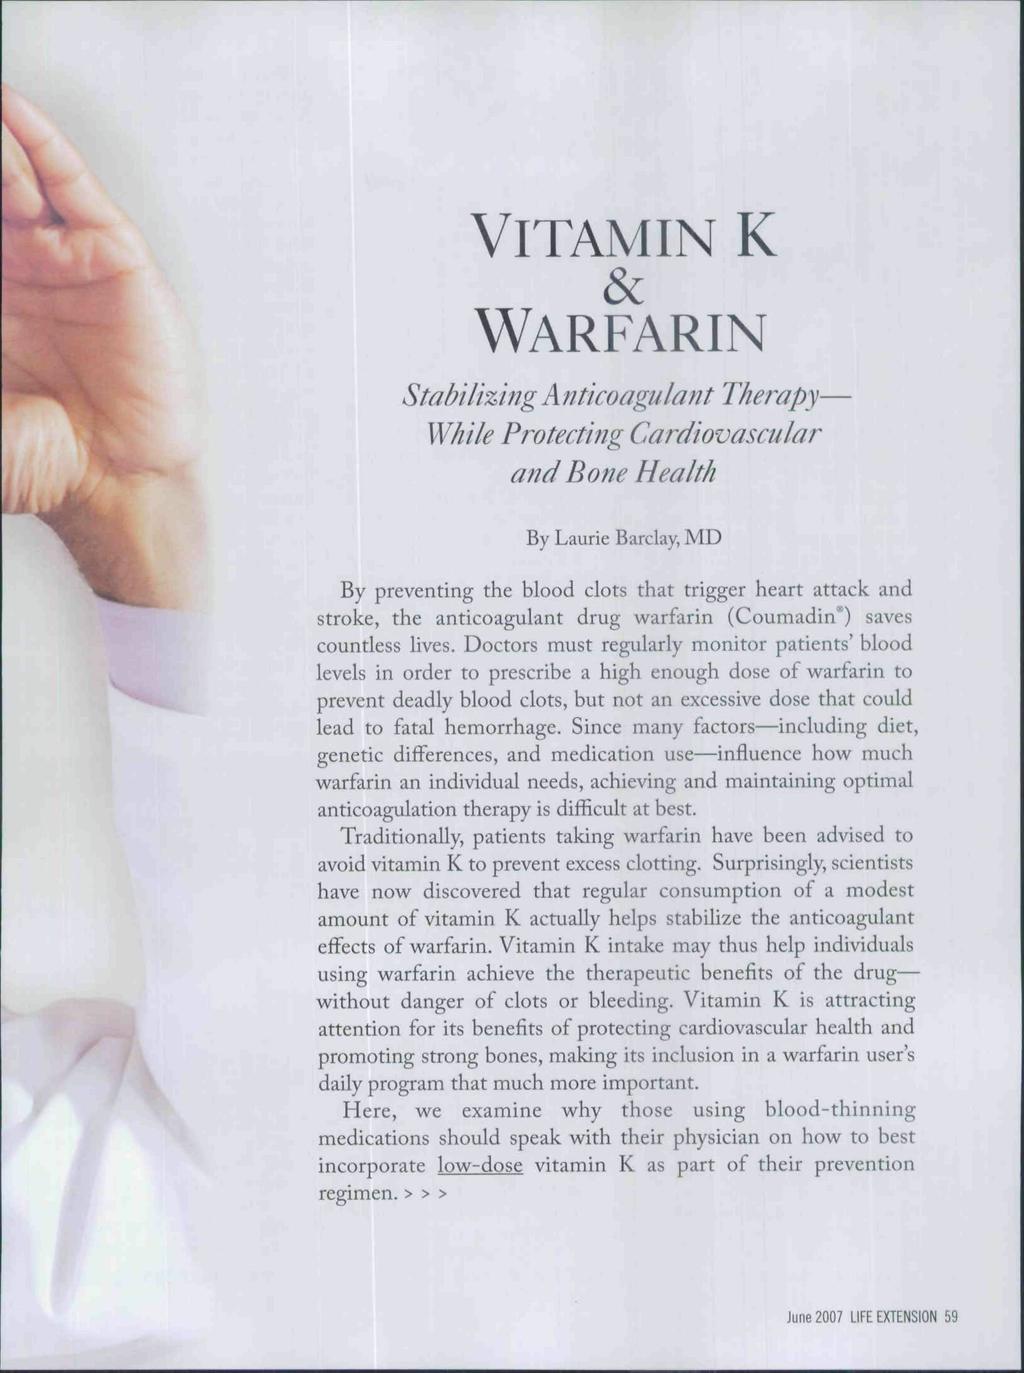 VITAMIN K WARFARIN Stabilizing Anticoagulant Therapy While Protecting Cardiovascular and Bone Health By Laurie Barclay, MD By preventing the blood clots that trigger heart attack and stroke, the